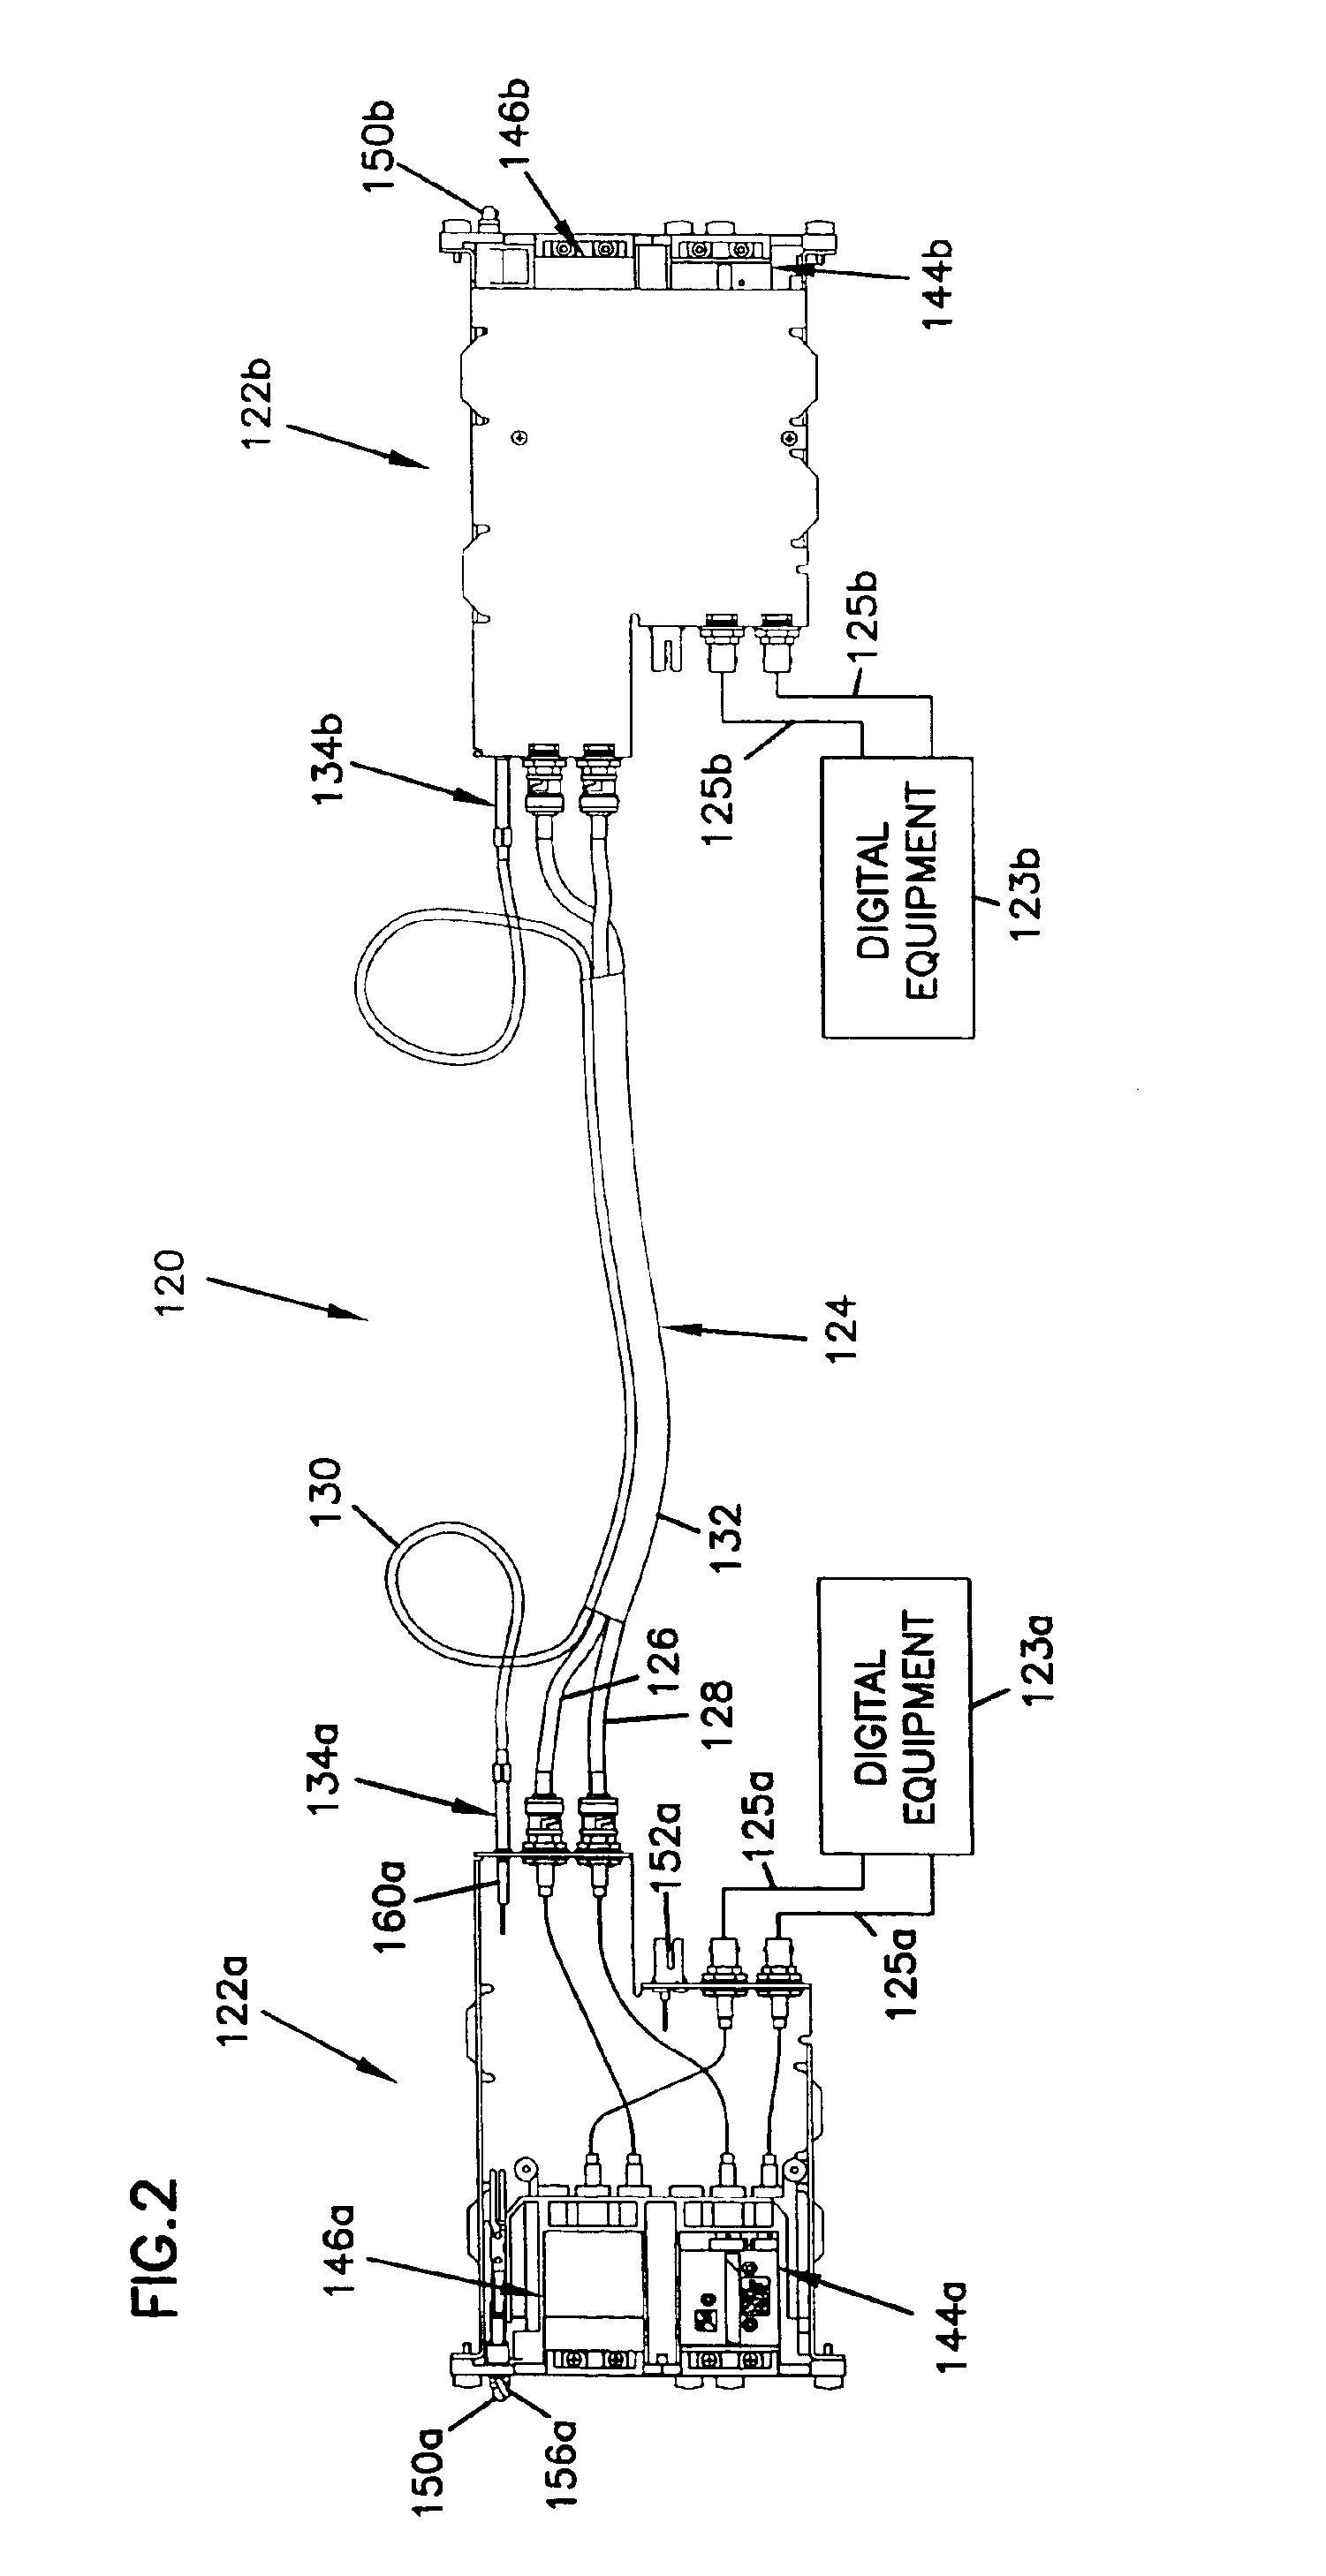 Cross-connect jumper assembly having tracer lamp